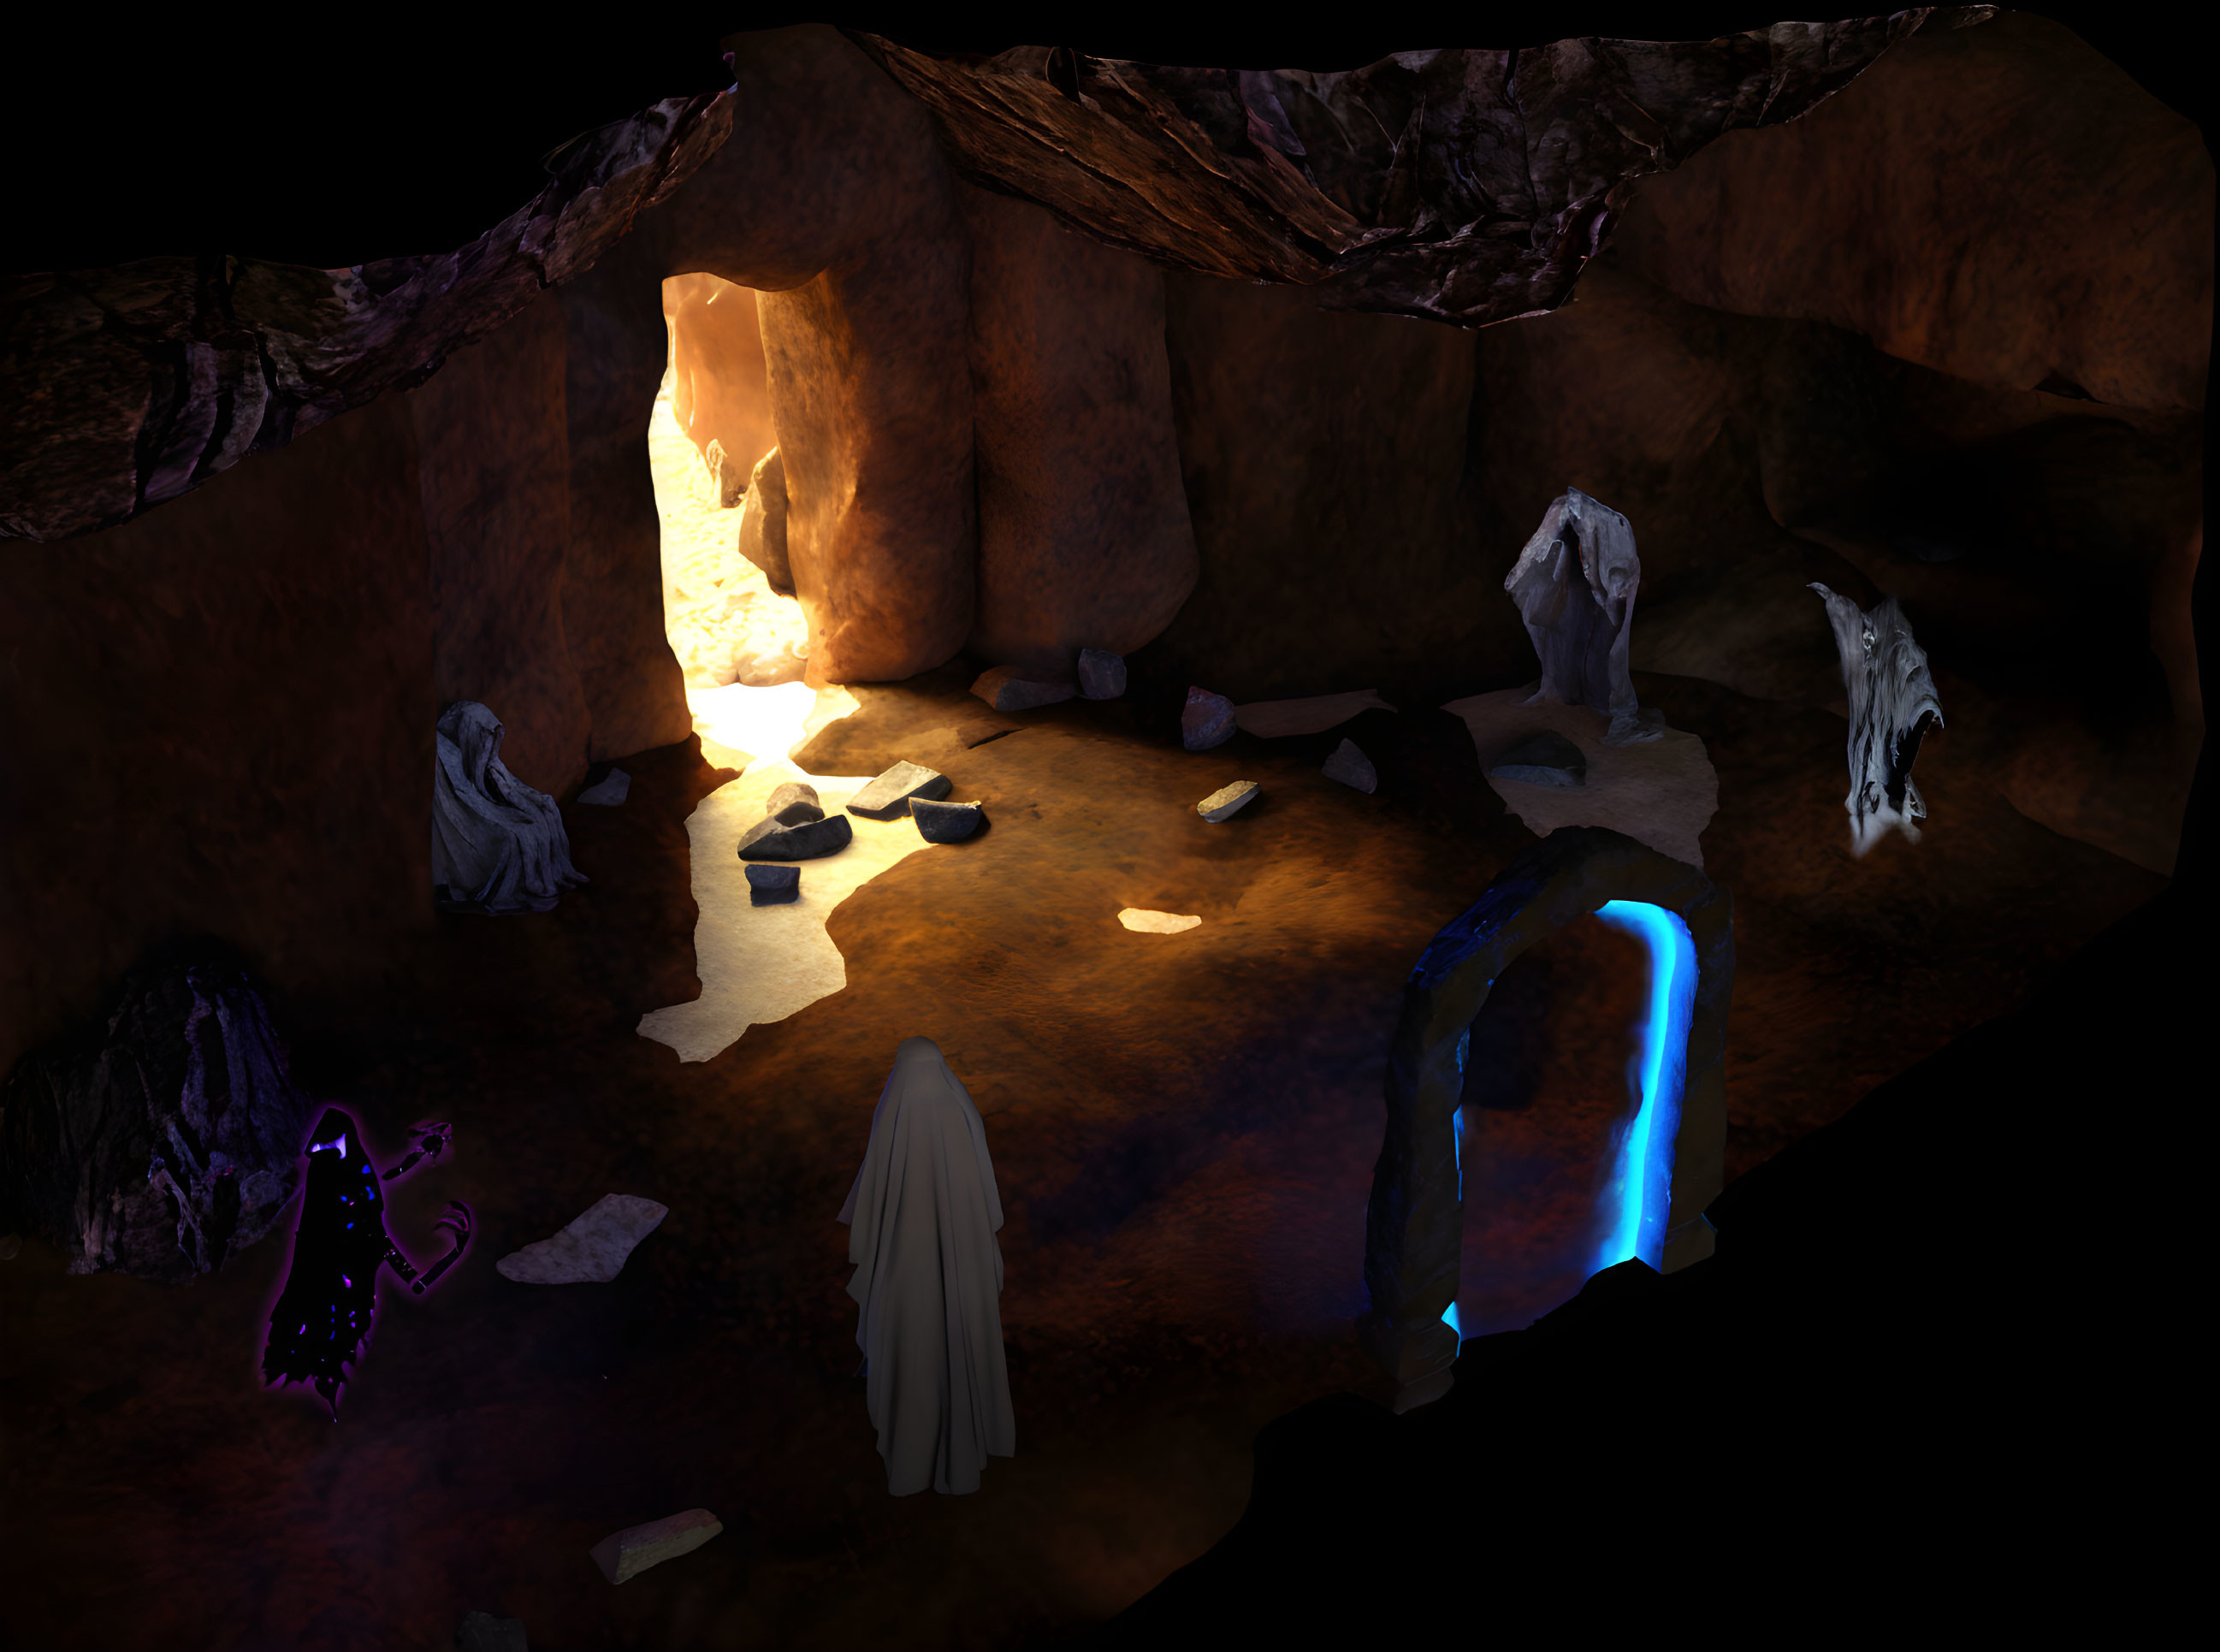 Mysterious figures in cloaks in dimly lit cave with glowing portal